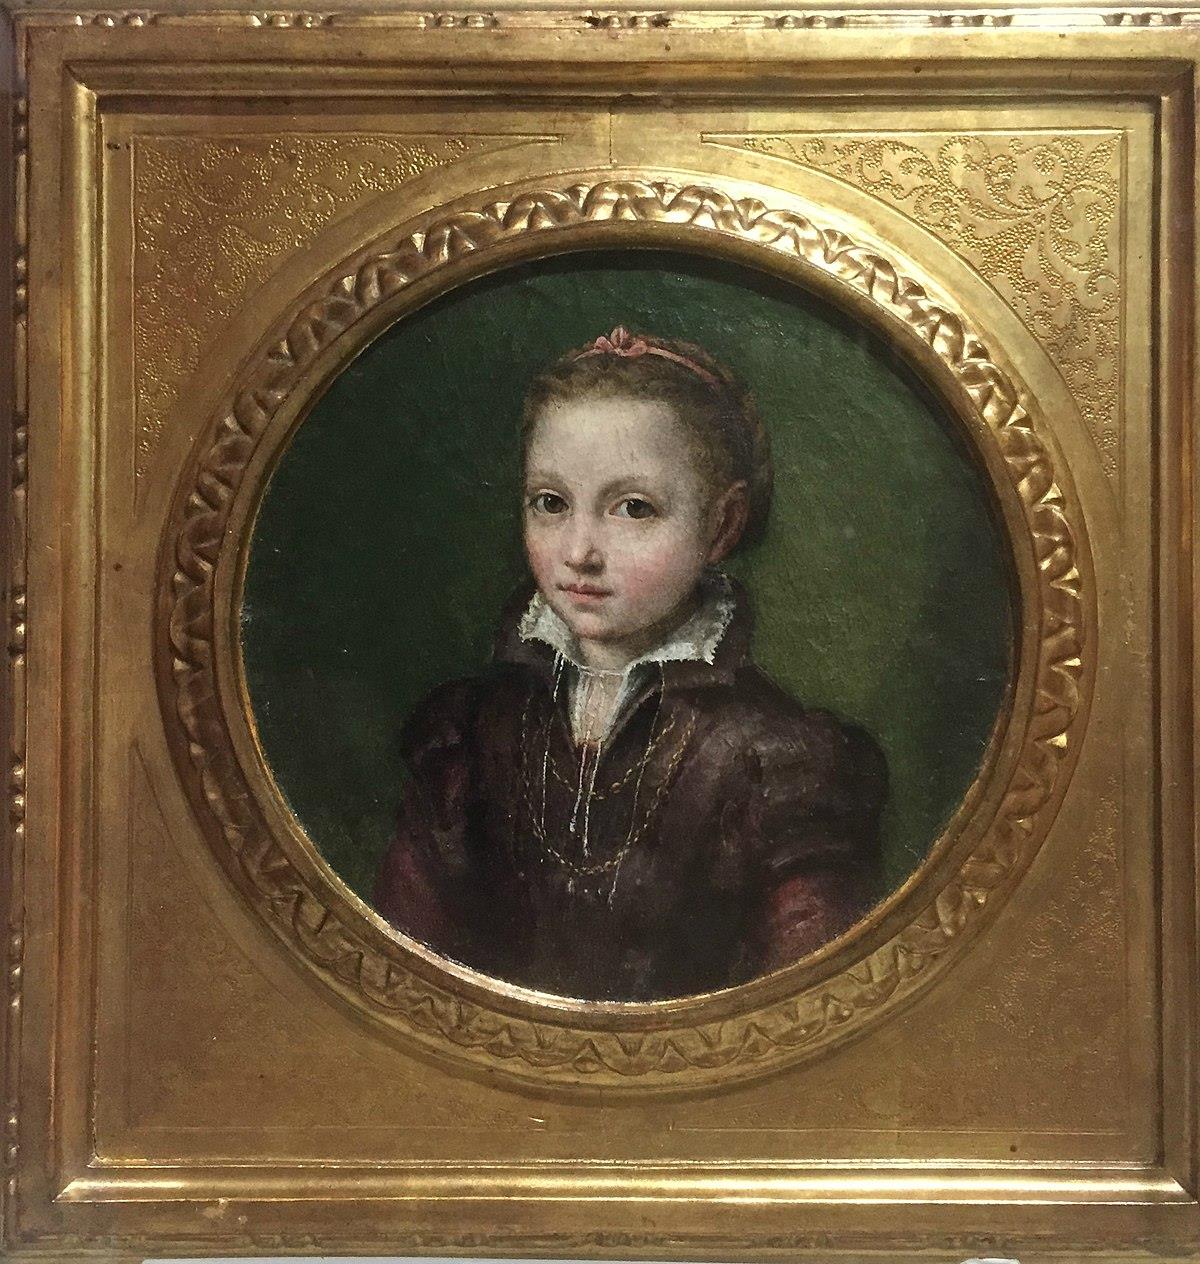 A round portrait of a young girl, maybe eleven or twelve years old, in a gold frame. The background of the portrait is green, and the girl is wearing sixteenth-century clothing, with a white collar and a pink bow in her hair. She looks directly out at the viewer.